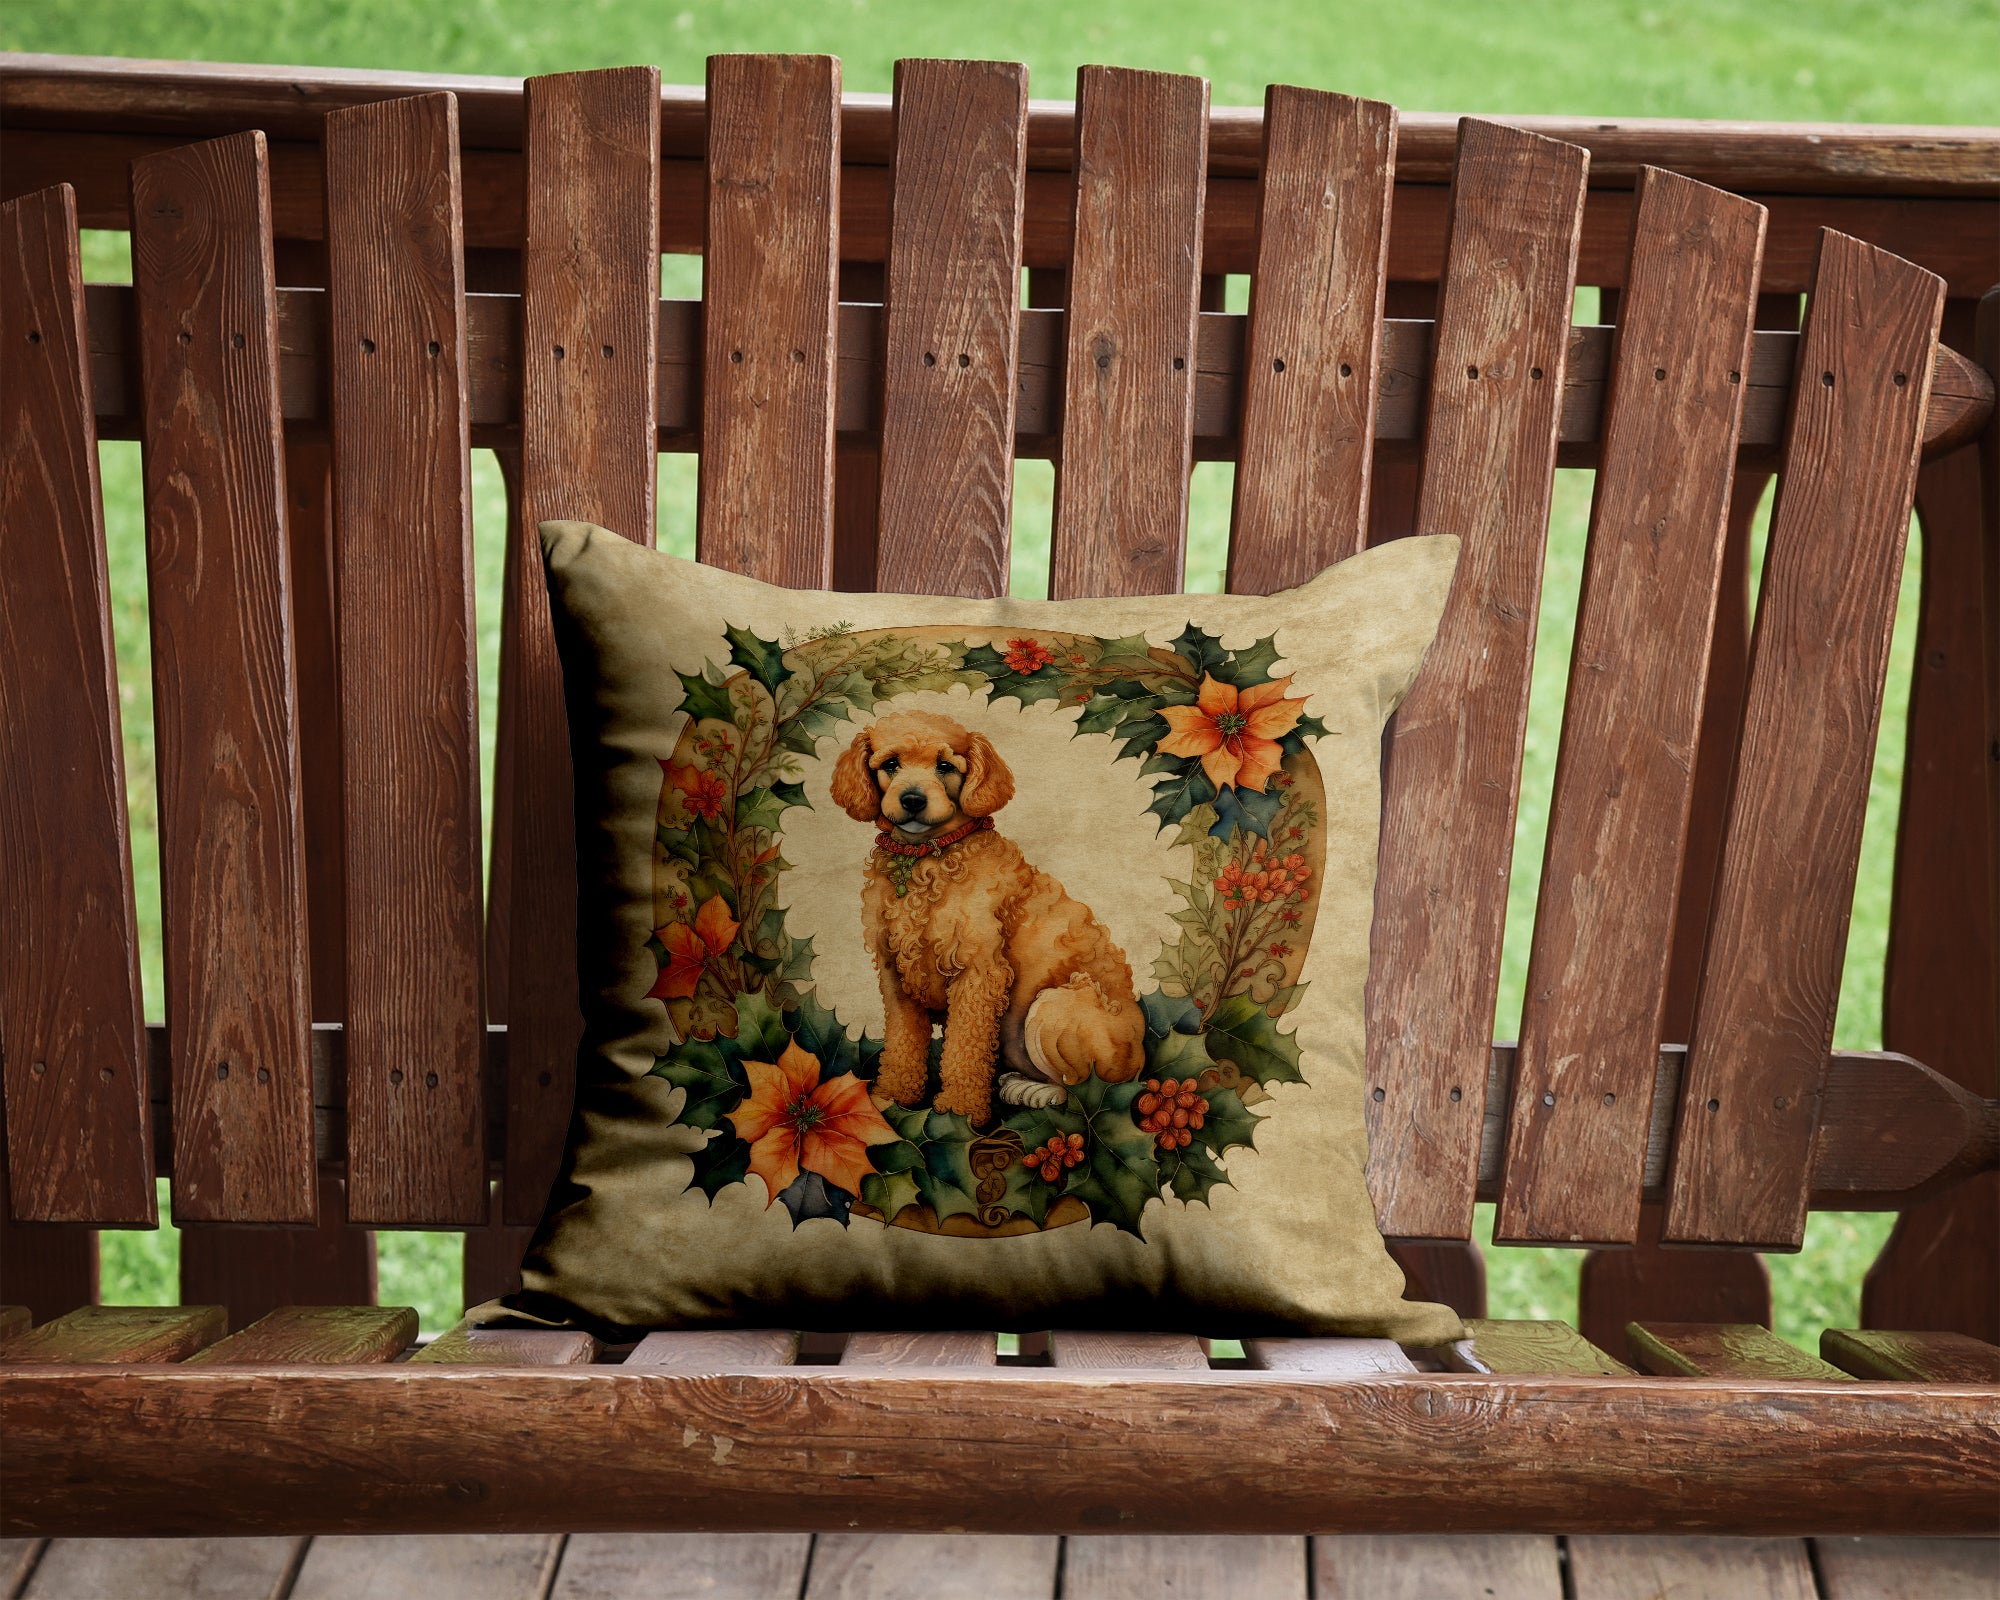 Buy this Poodle Christmas Flowers Throw Pillow